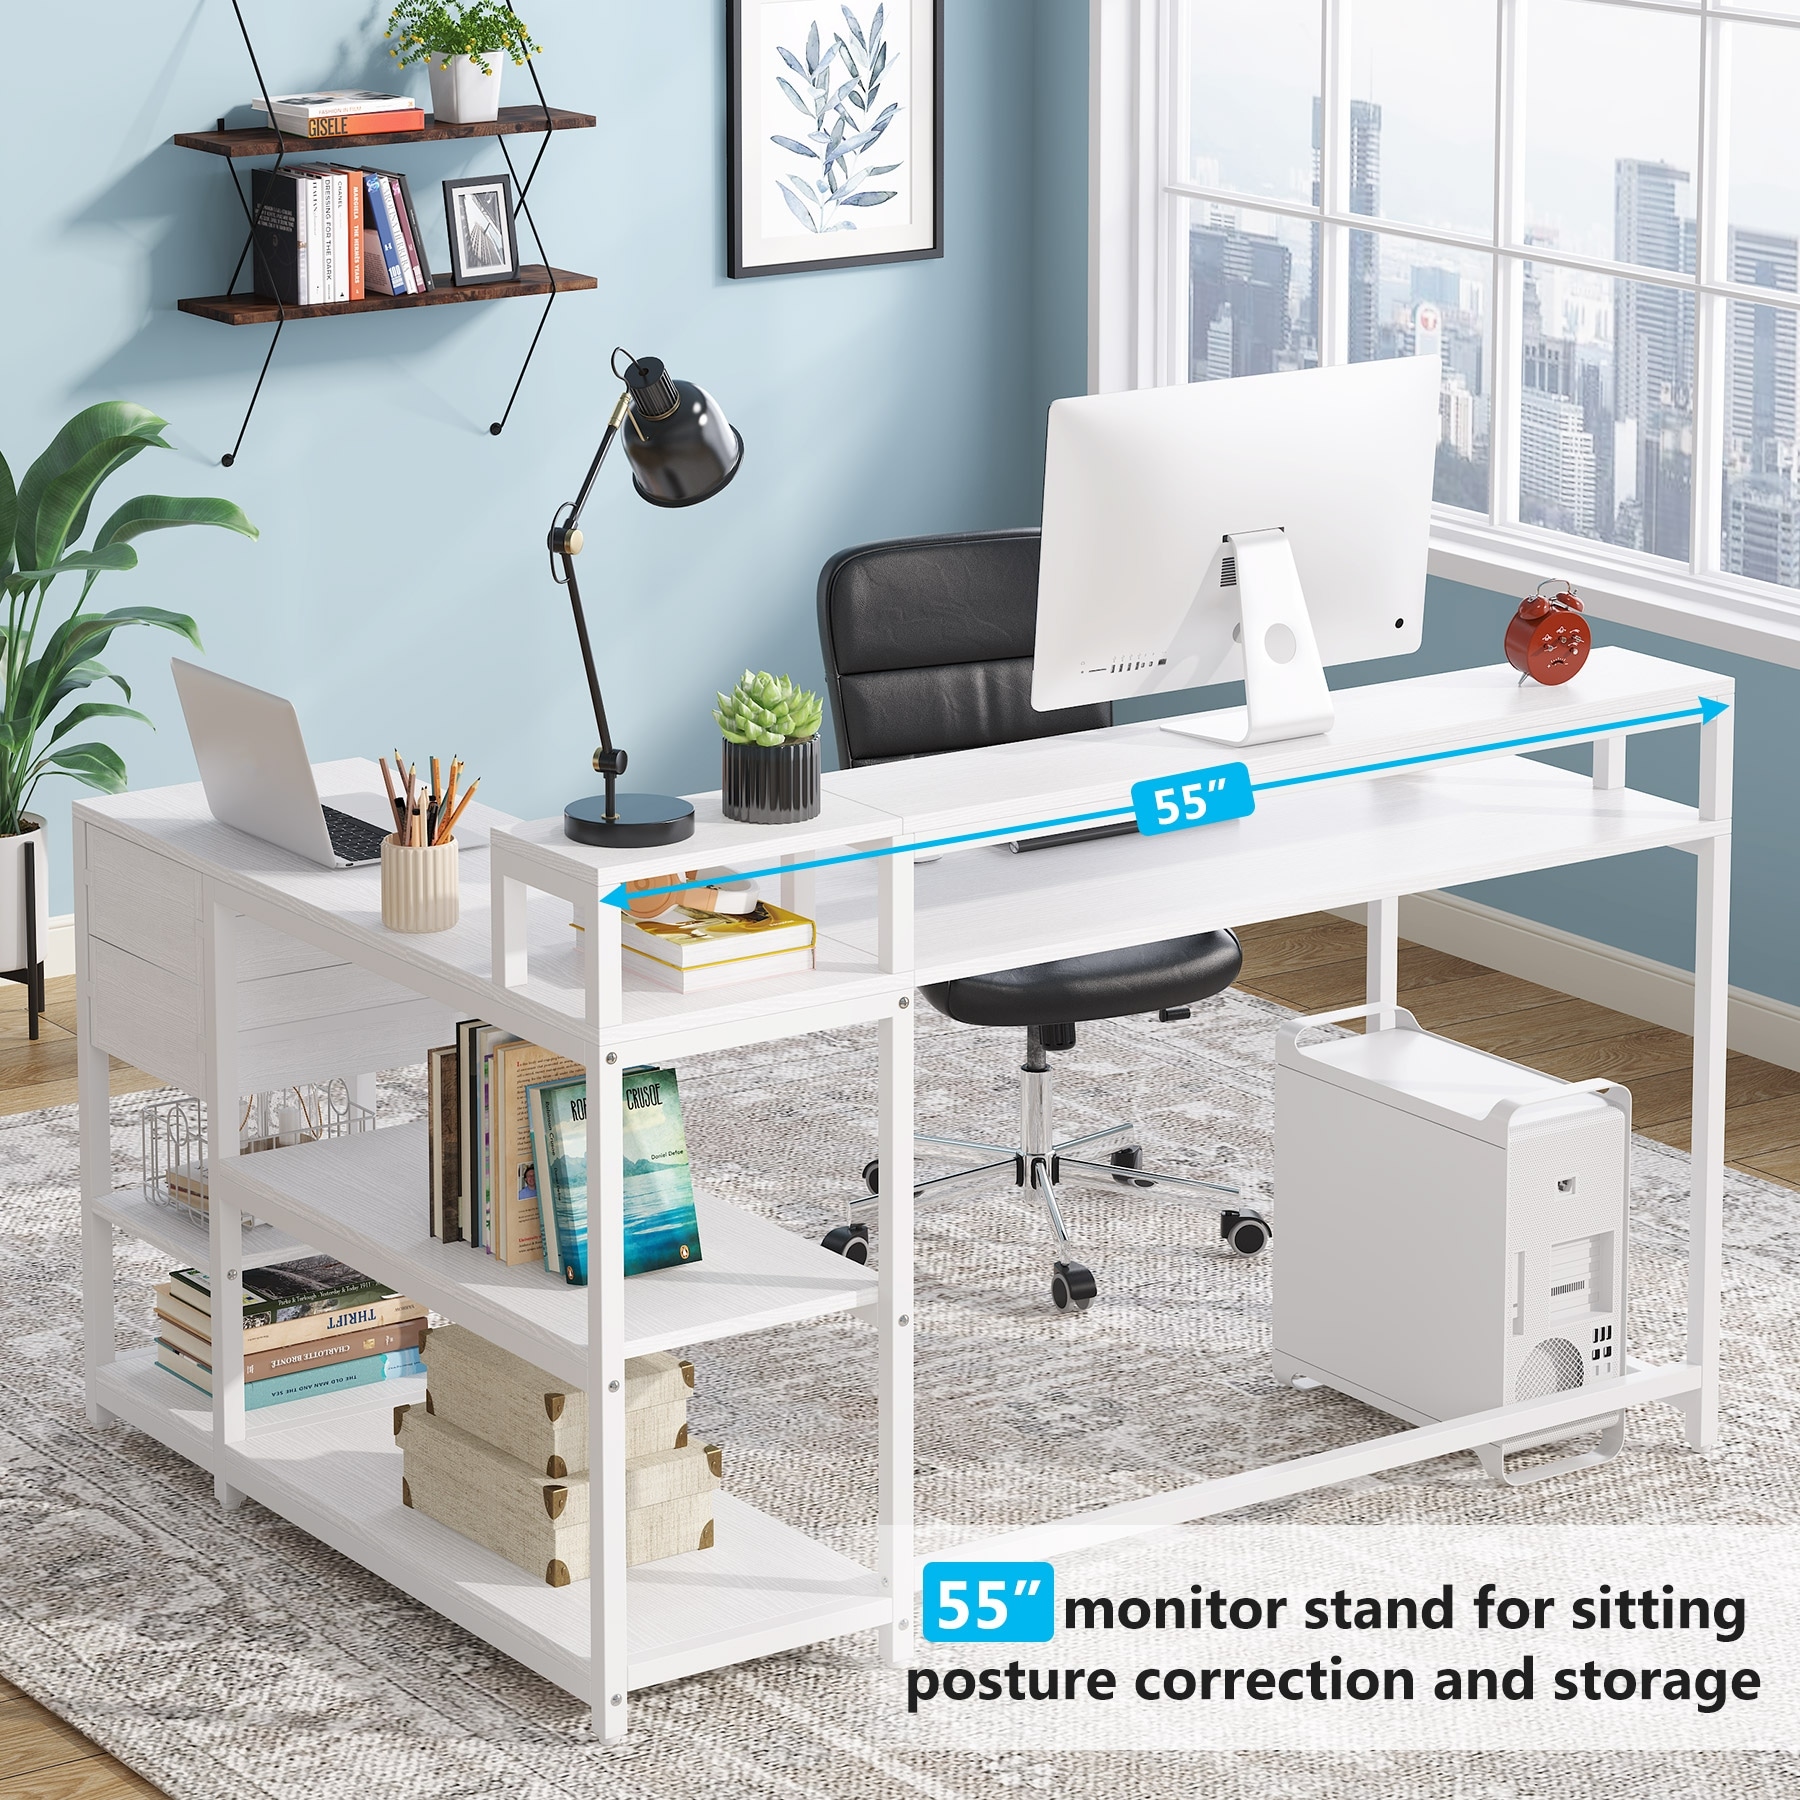 https://ak1.ostkcdn.com/images/products/is/images/direct/45b7d5e6aaa24c216e64222d9c8d6ff8d2ed6844/L-Shaped-Desk-with-Drawer%2C-Home-Office-Corner-Desk-with-Storage-Shelves-and-Monitor-Stand%2C-Rustic-PC-Desk-for-Small-Space.jpg